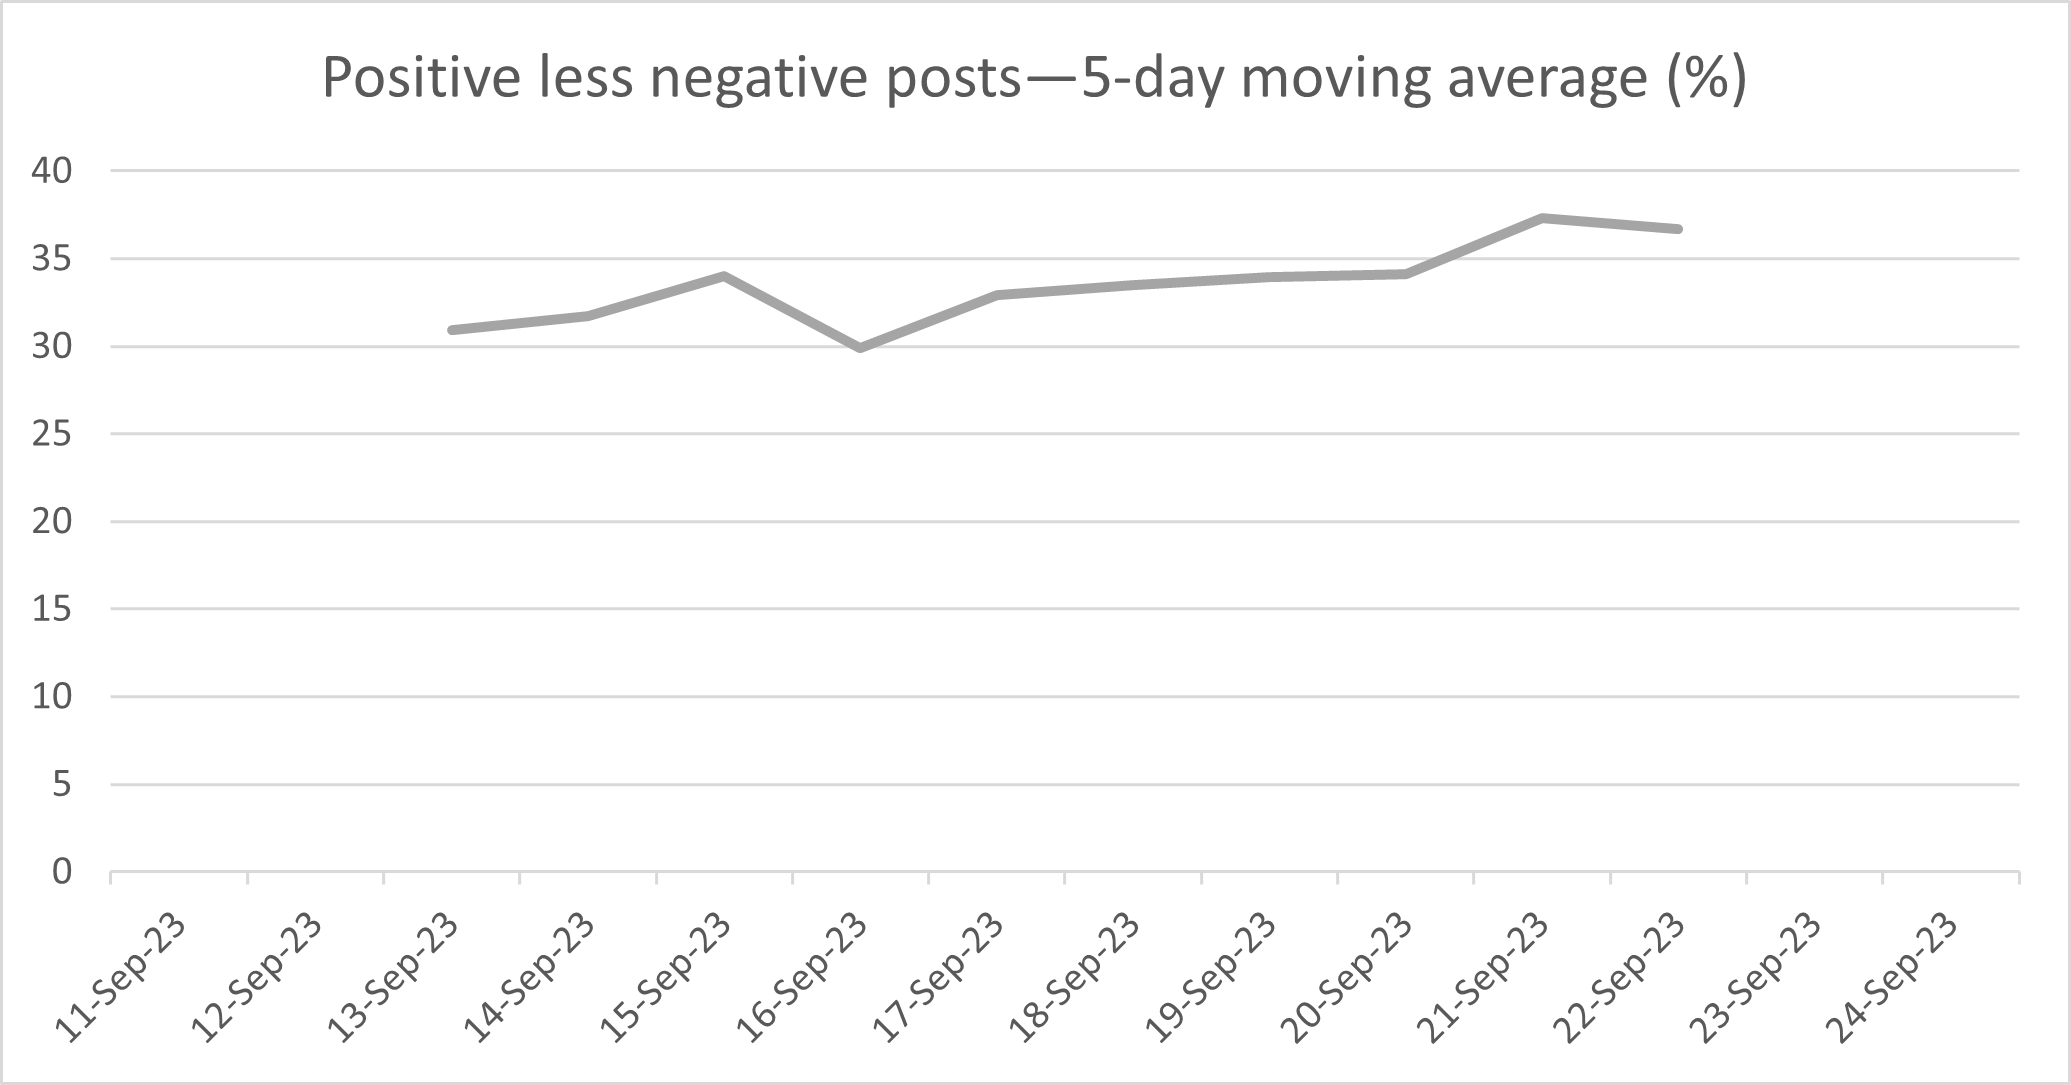 Trends in positive posts